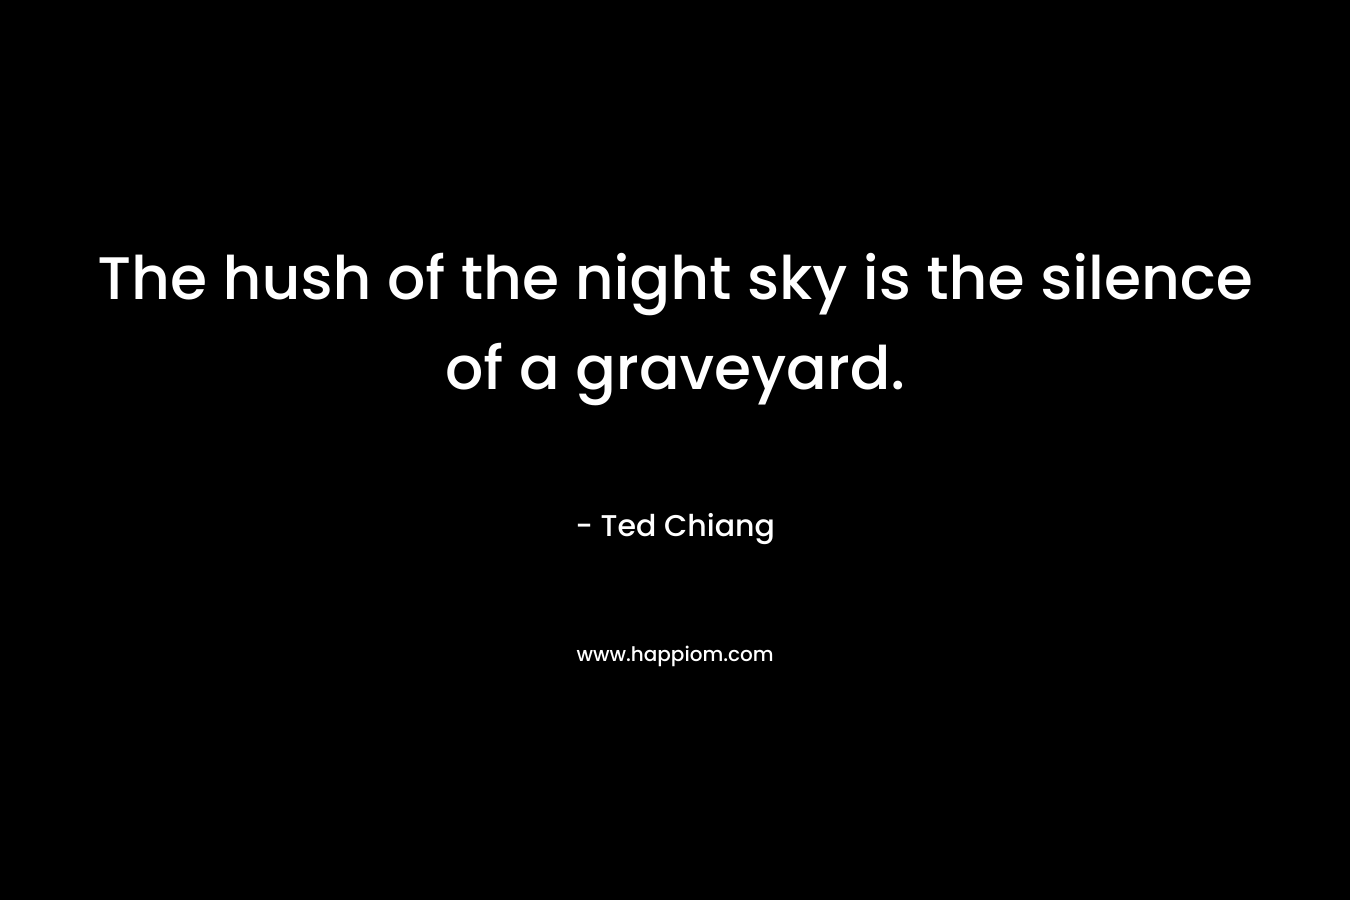 The hush of the night sky is the silence of a graveyard. – Ted Chiang